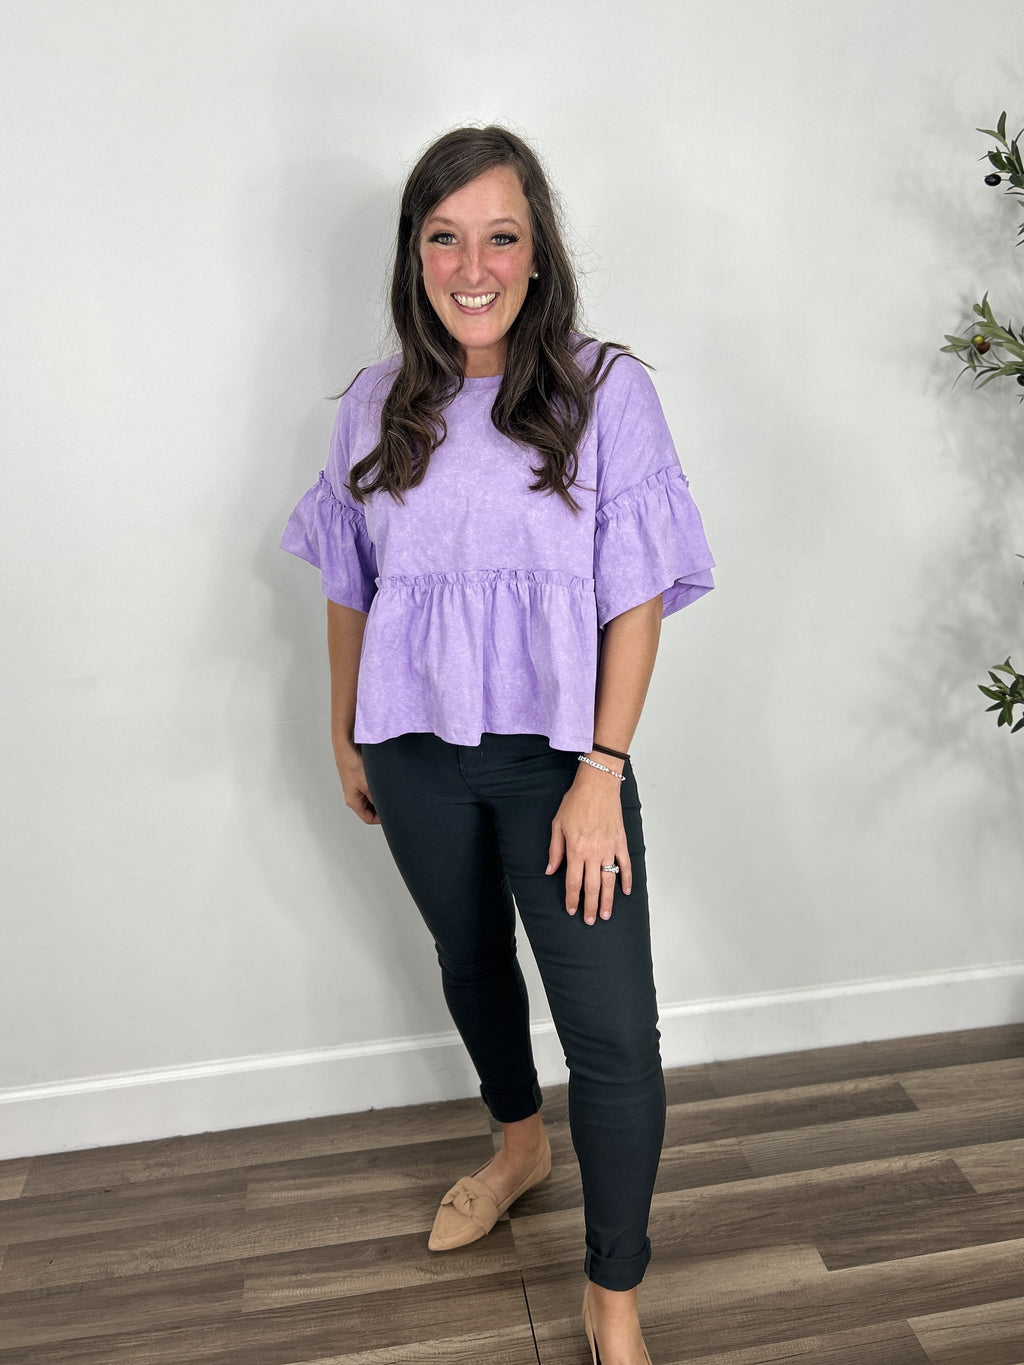 Women's purple peplum ruffle sleeve top paired with charcoal skinny jeans and camel color flat slip on shoes.